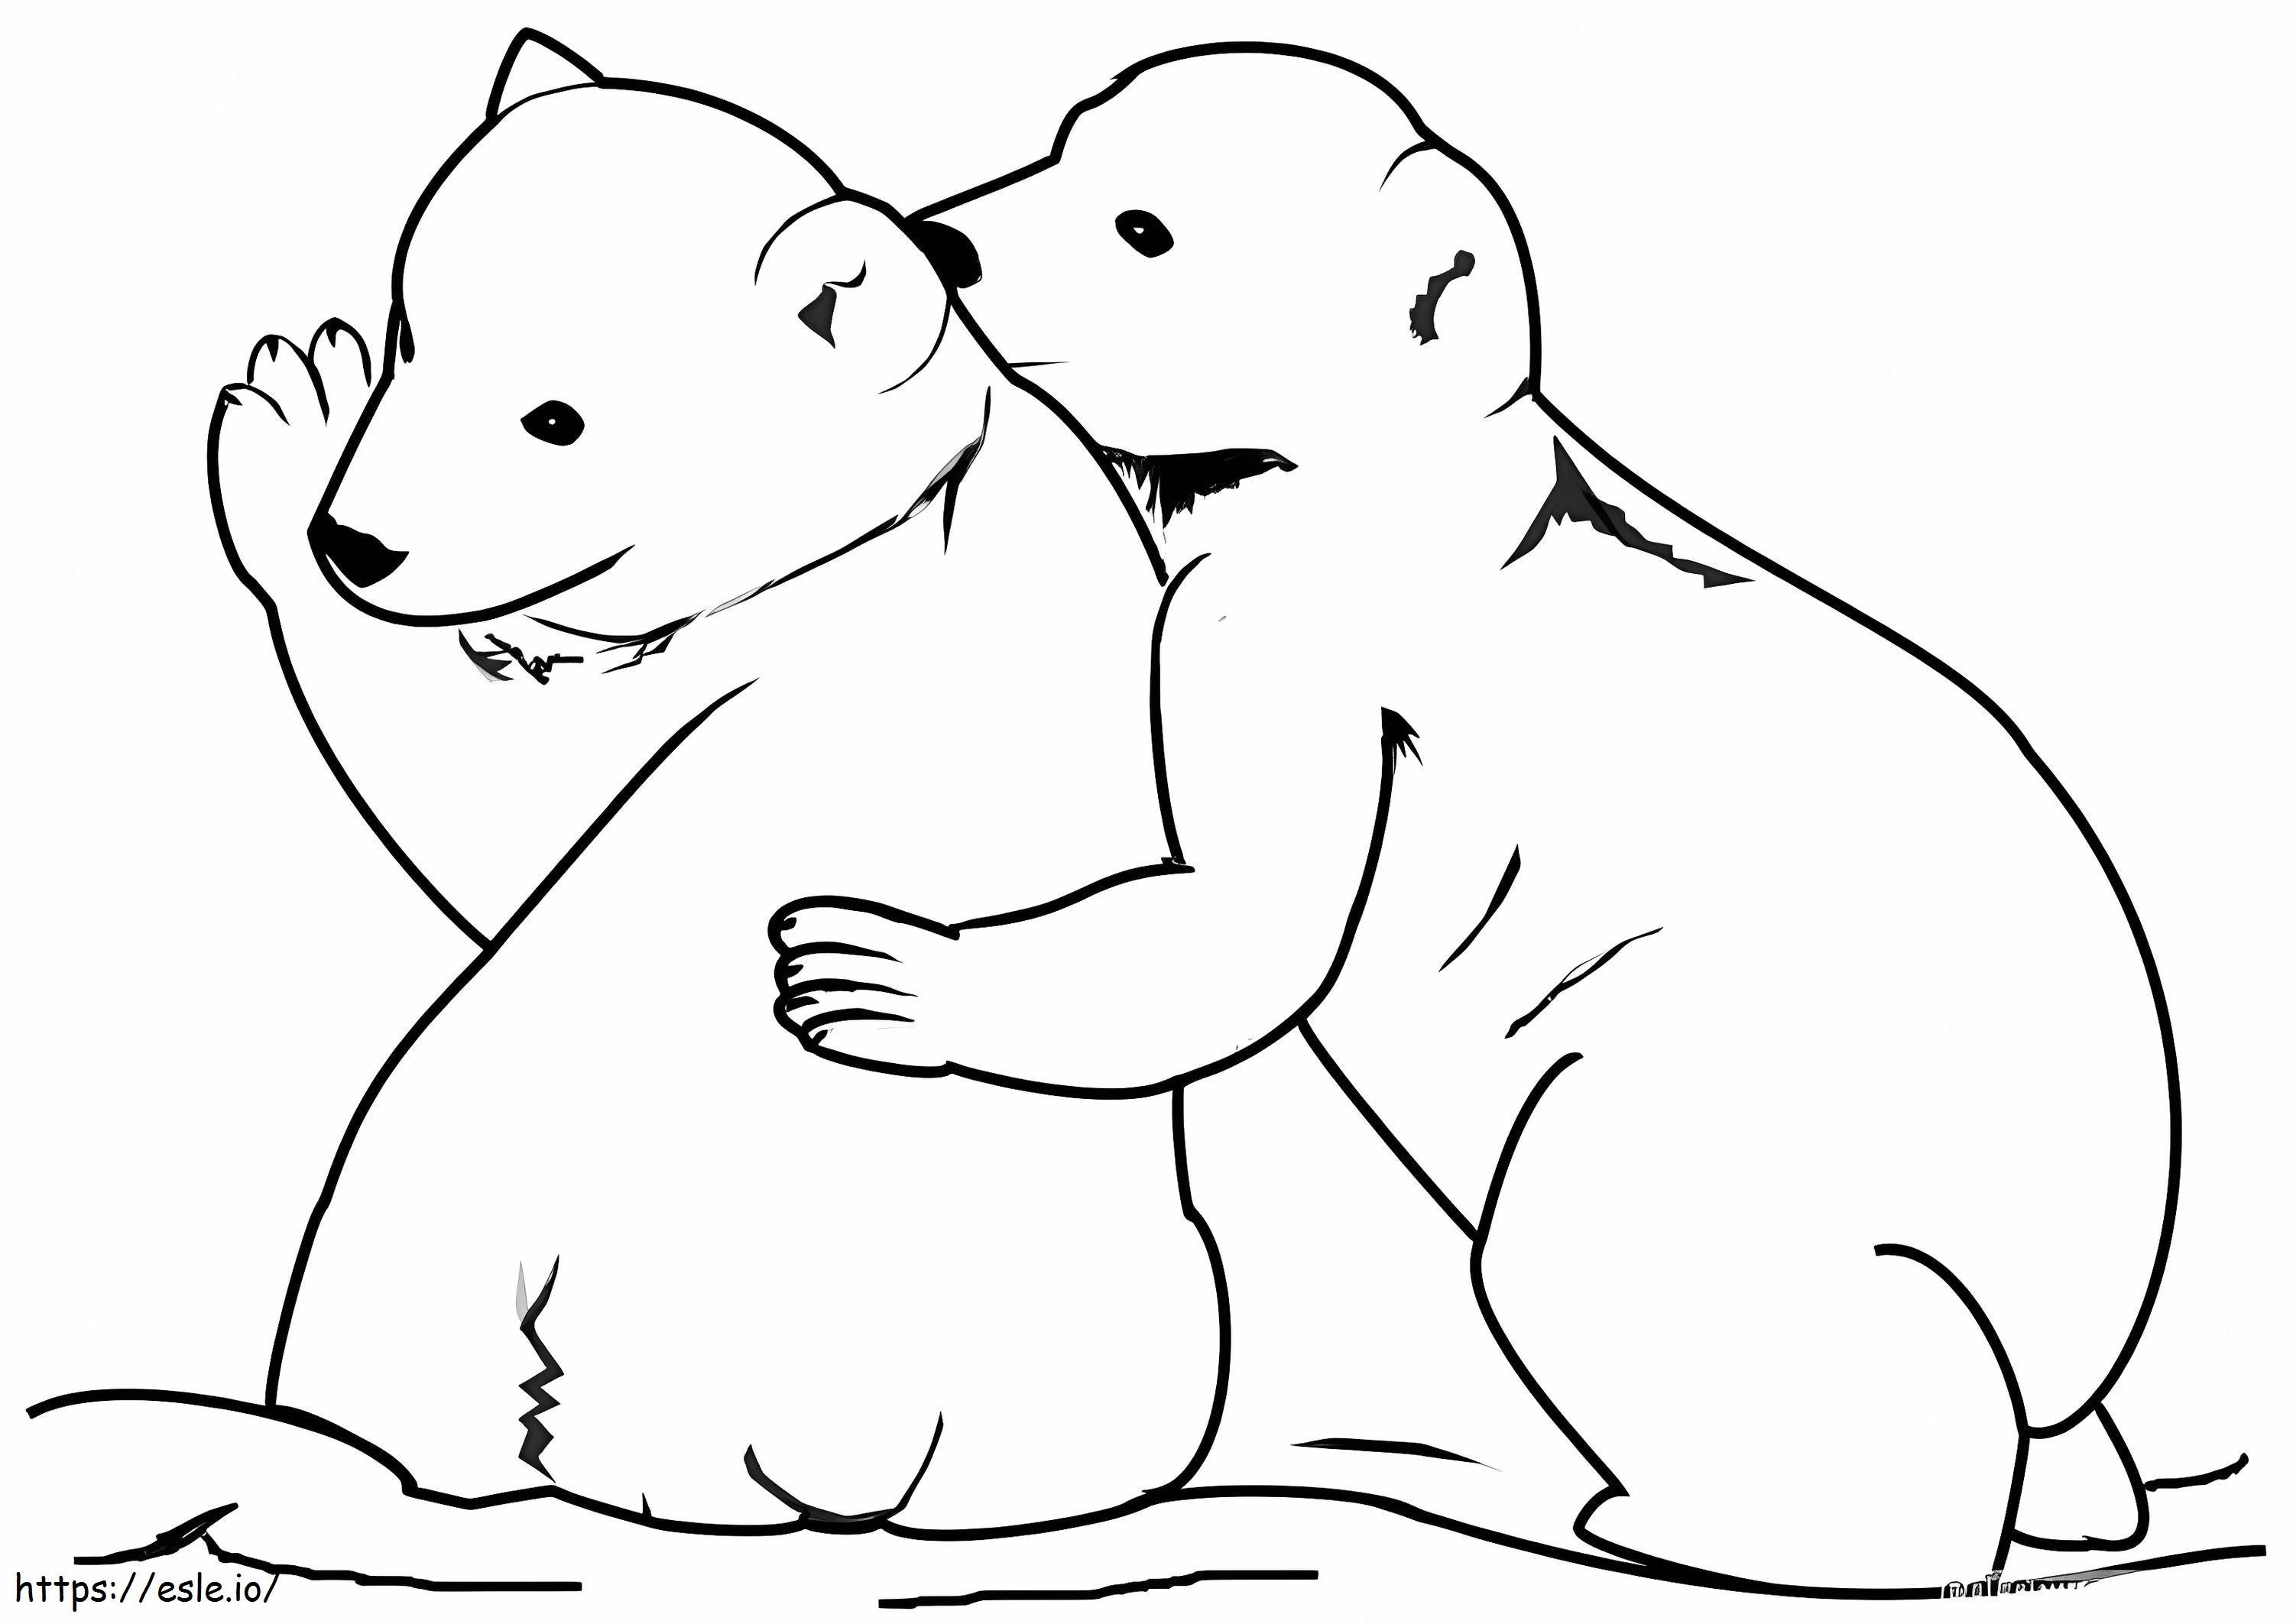 Two Ice Bear coloring page